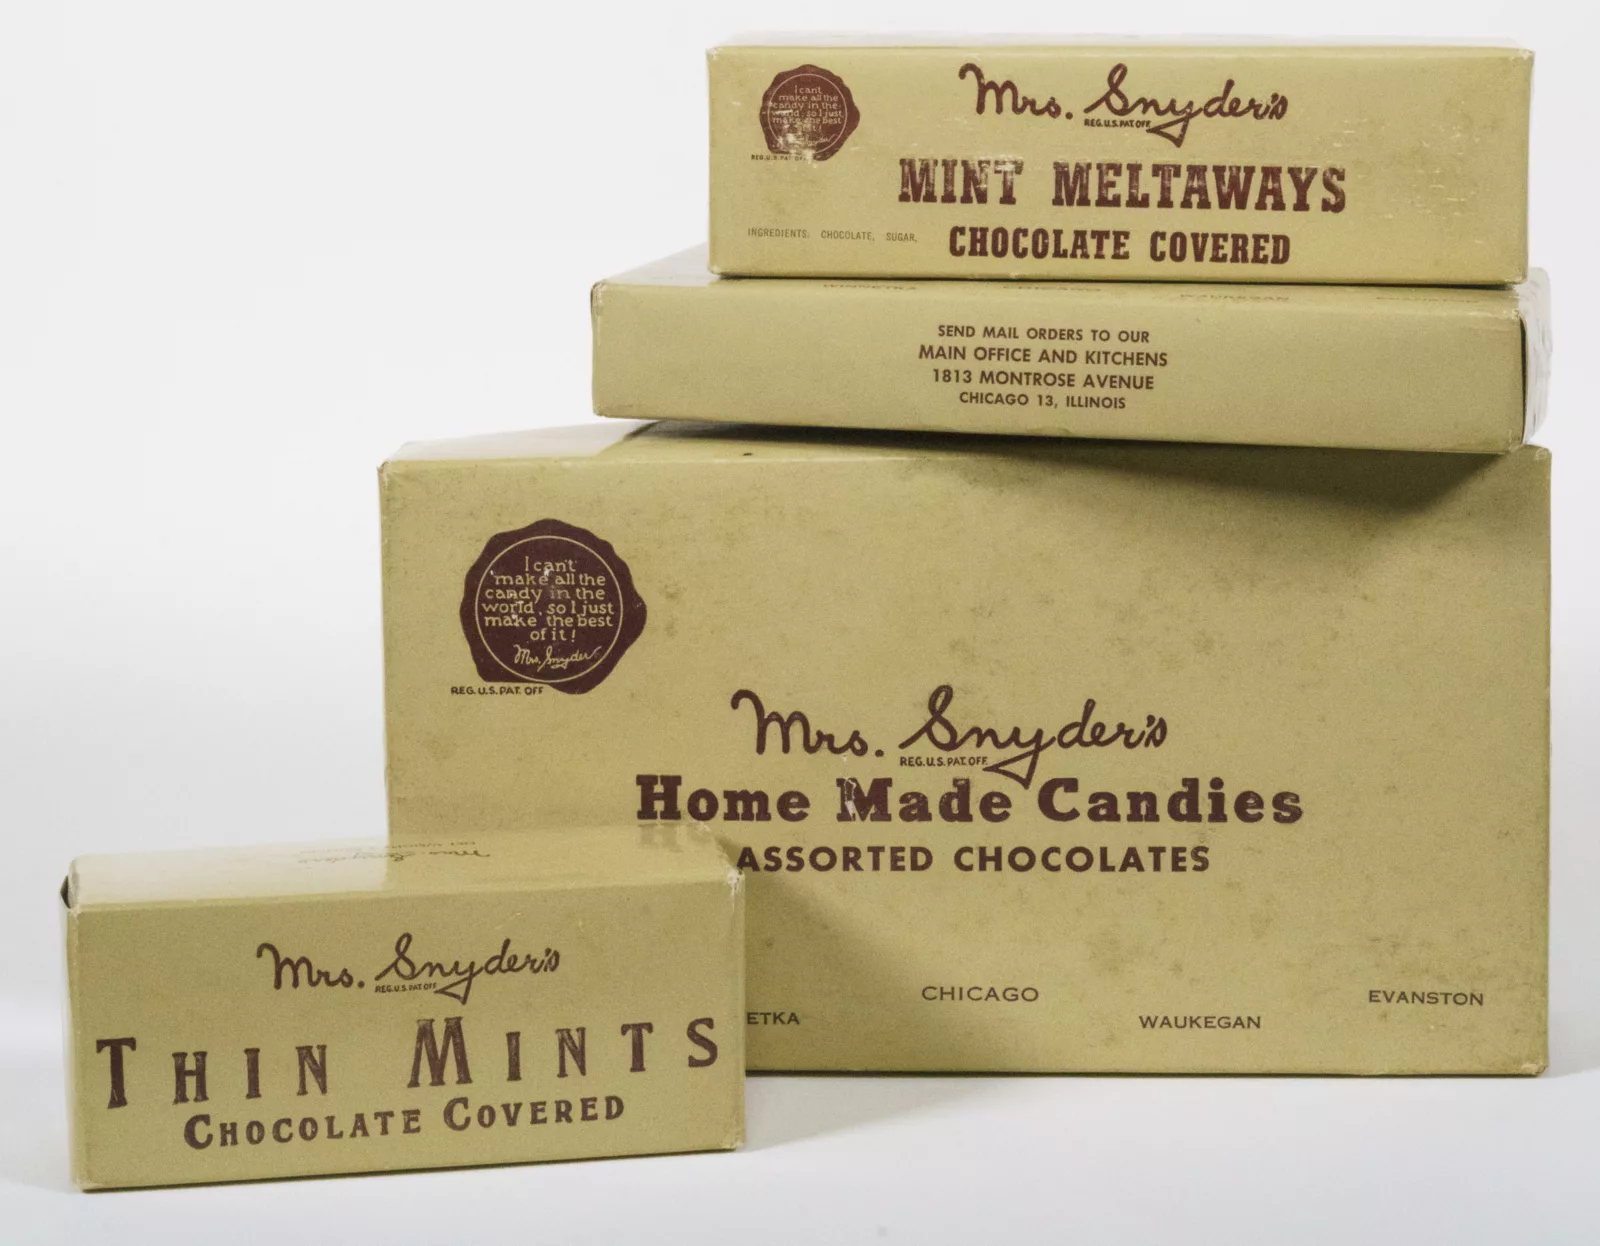 Candy boxes from Mrs. Snyder's Home Candies are stacked on top of each other.